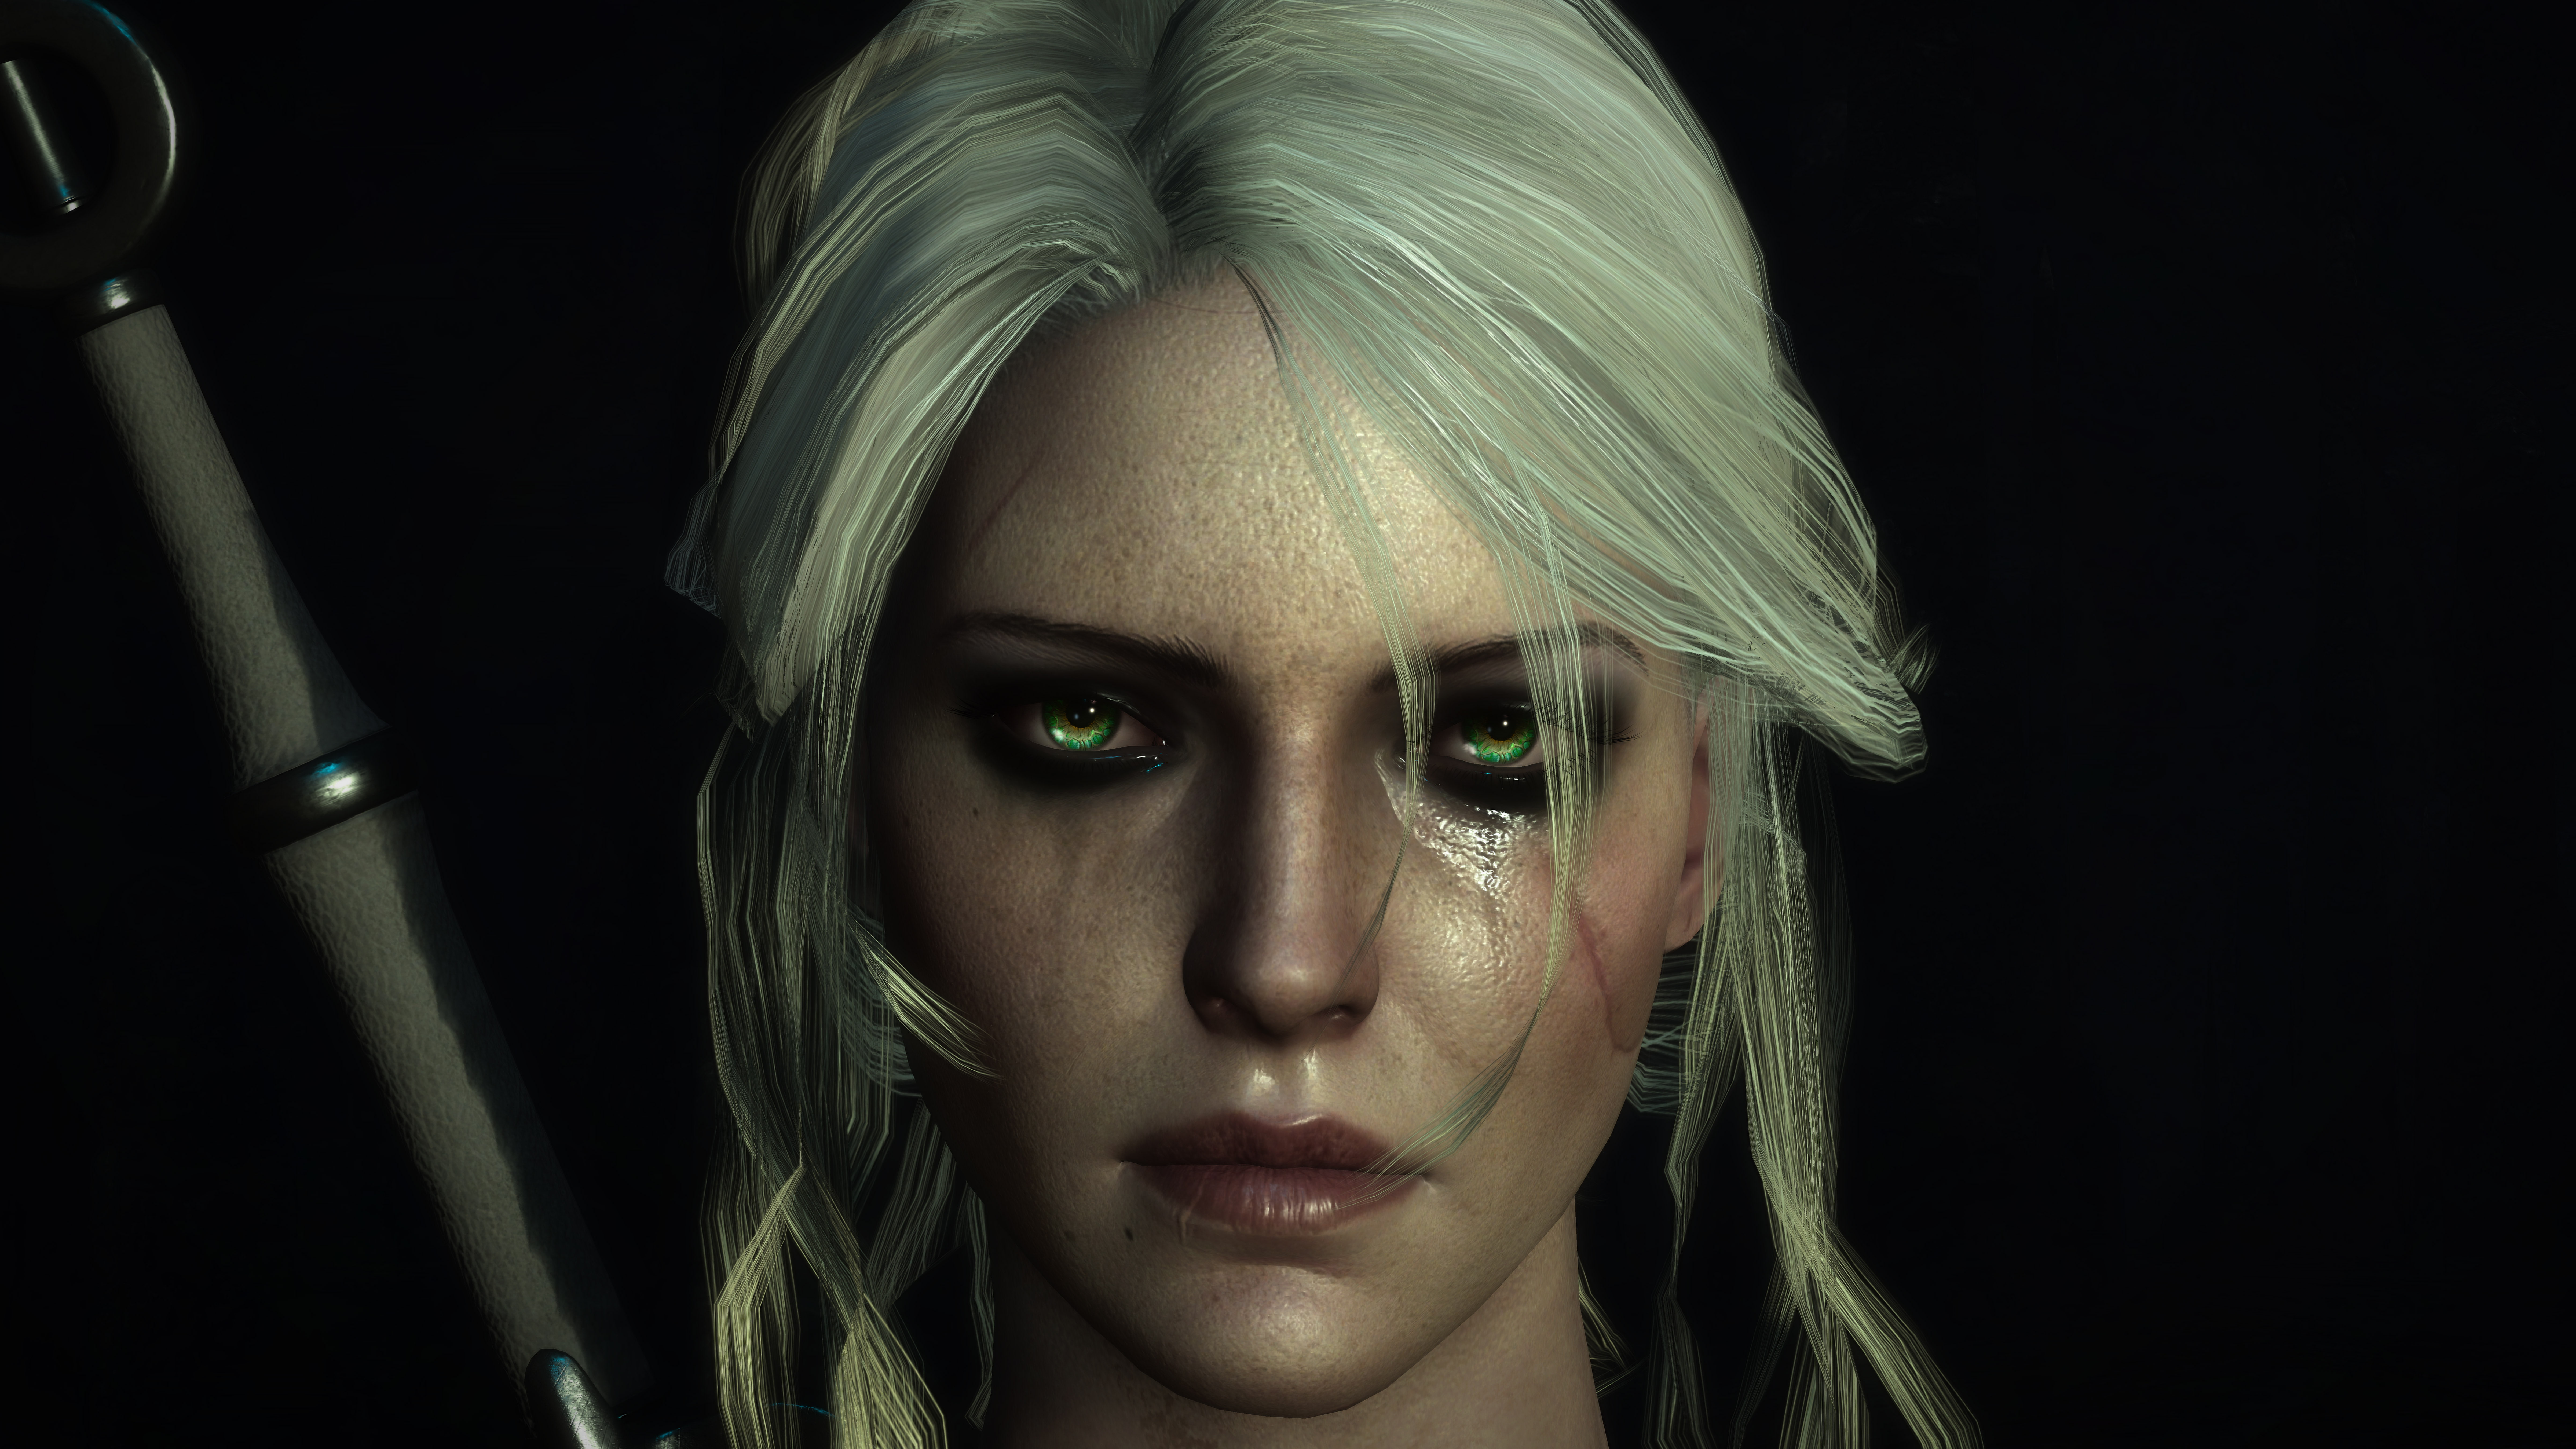 Witch Face The Witcher Cirilla Fiona Elen Riannon The Witcher 3 The Witcher 3 Wild Hunt Video Games  9600x5400